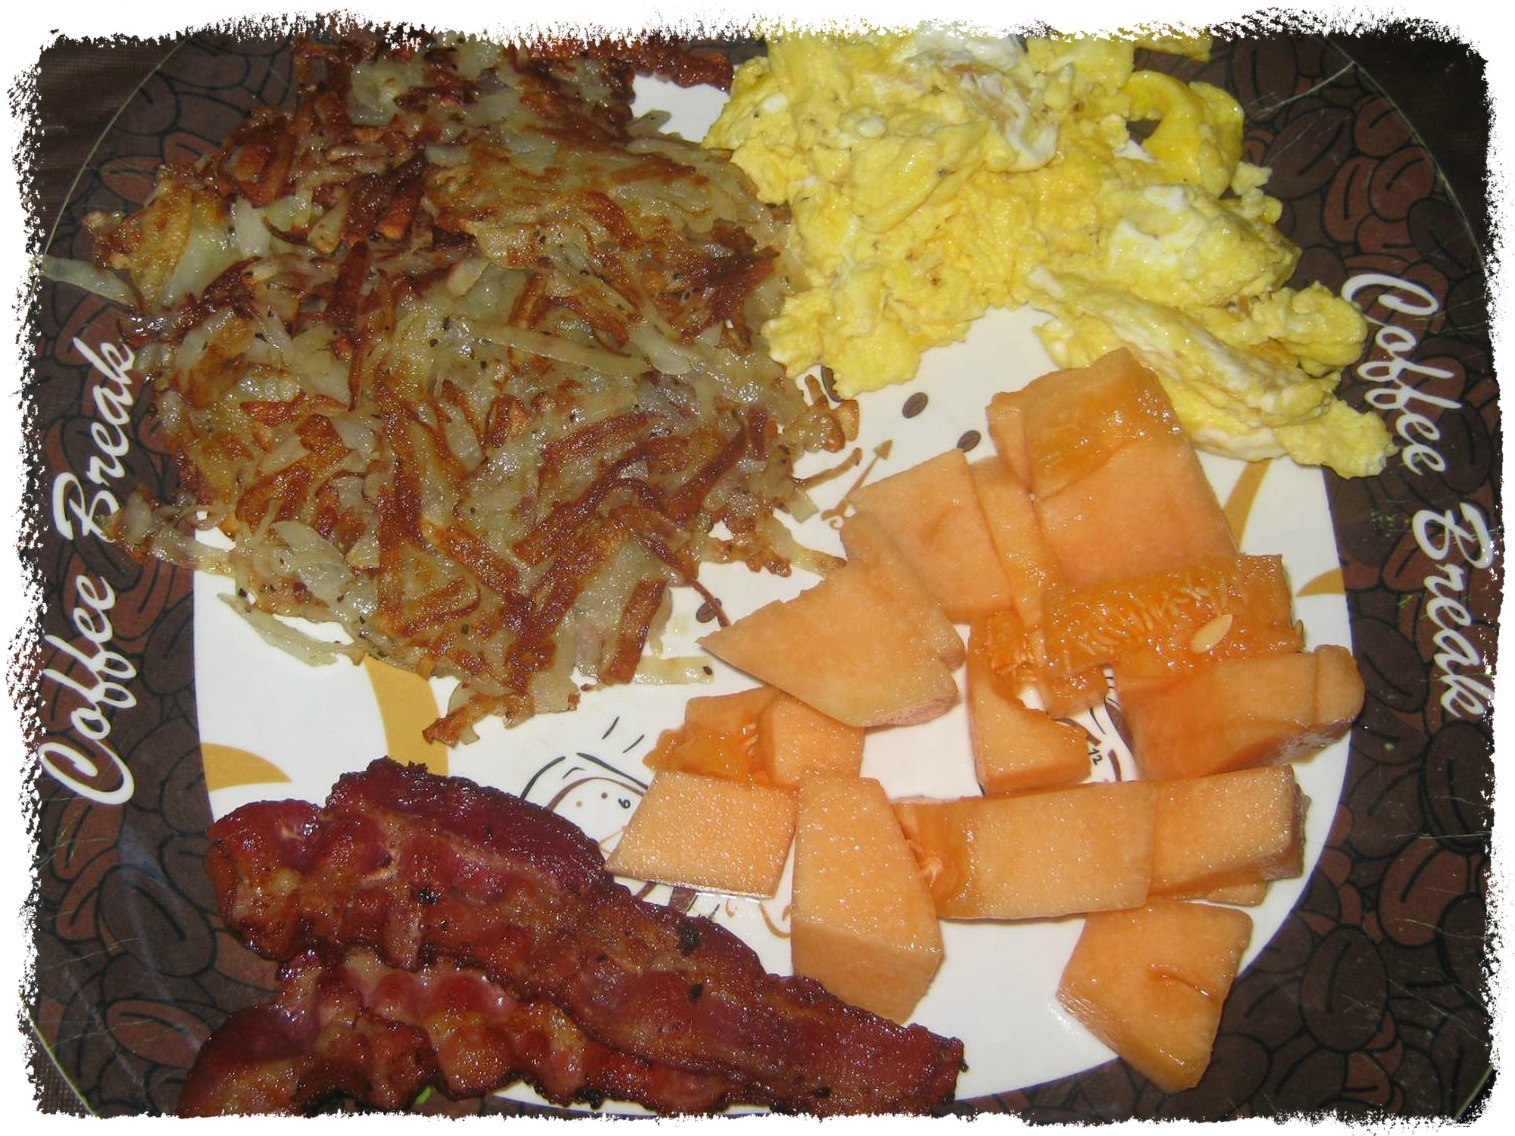 Canteloupe nitrate free bacon hash browns eggs